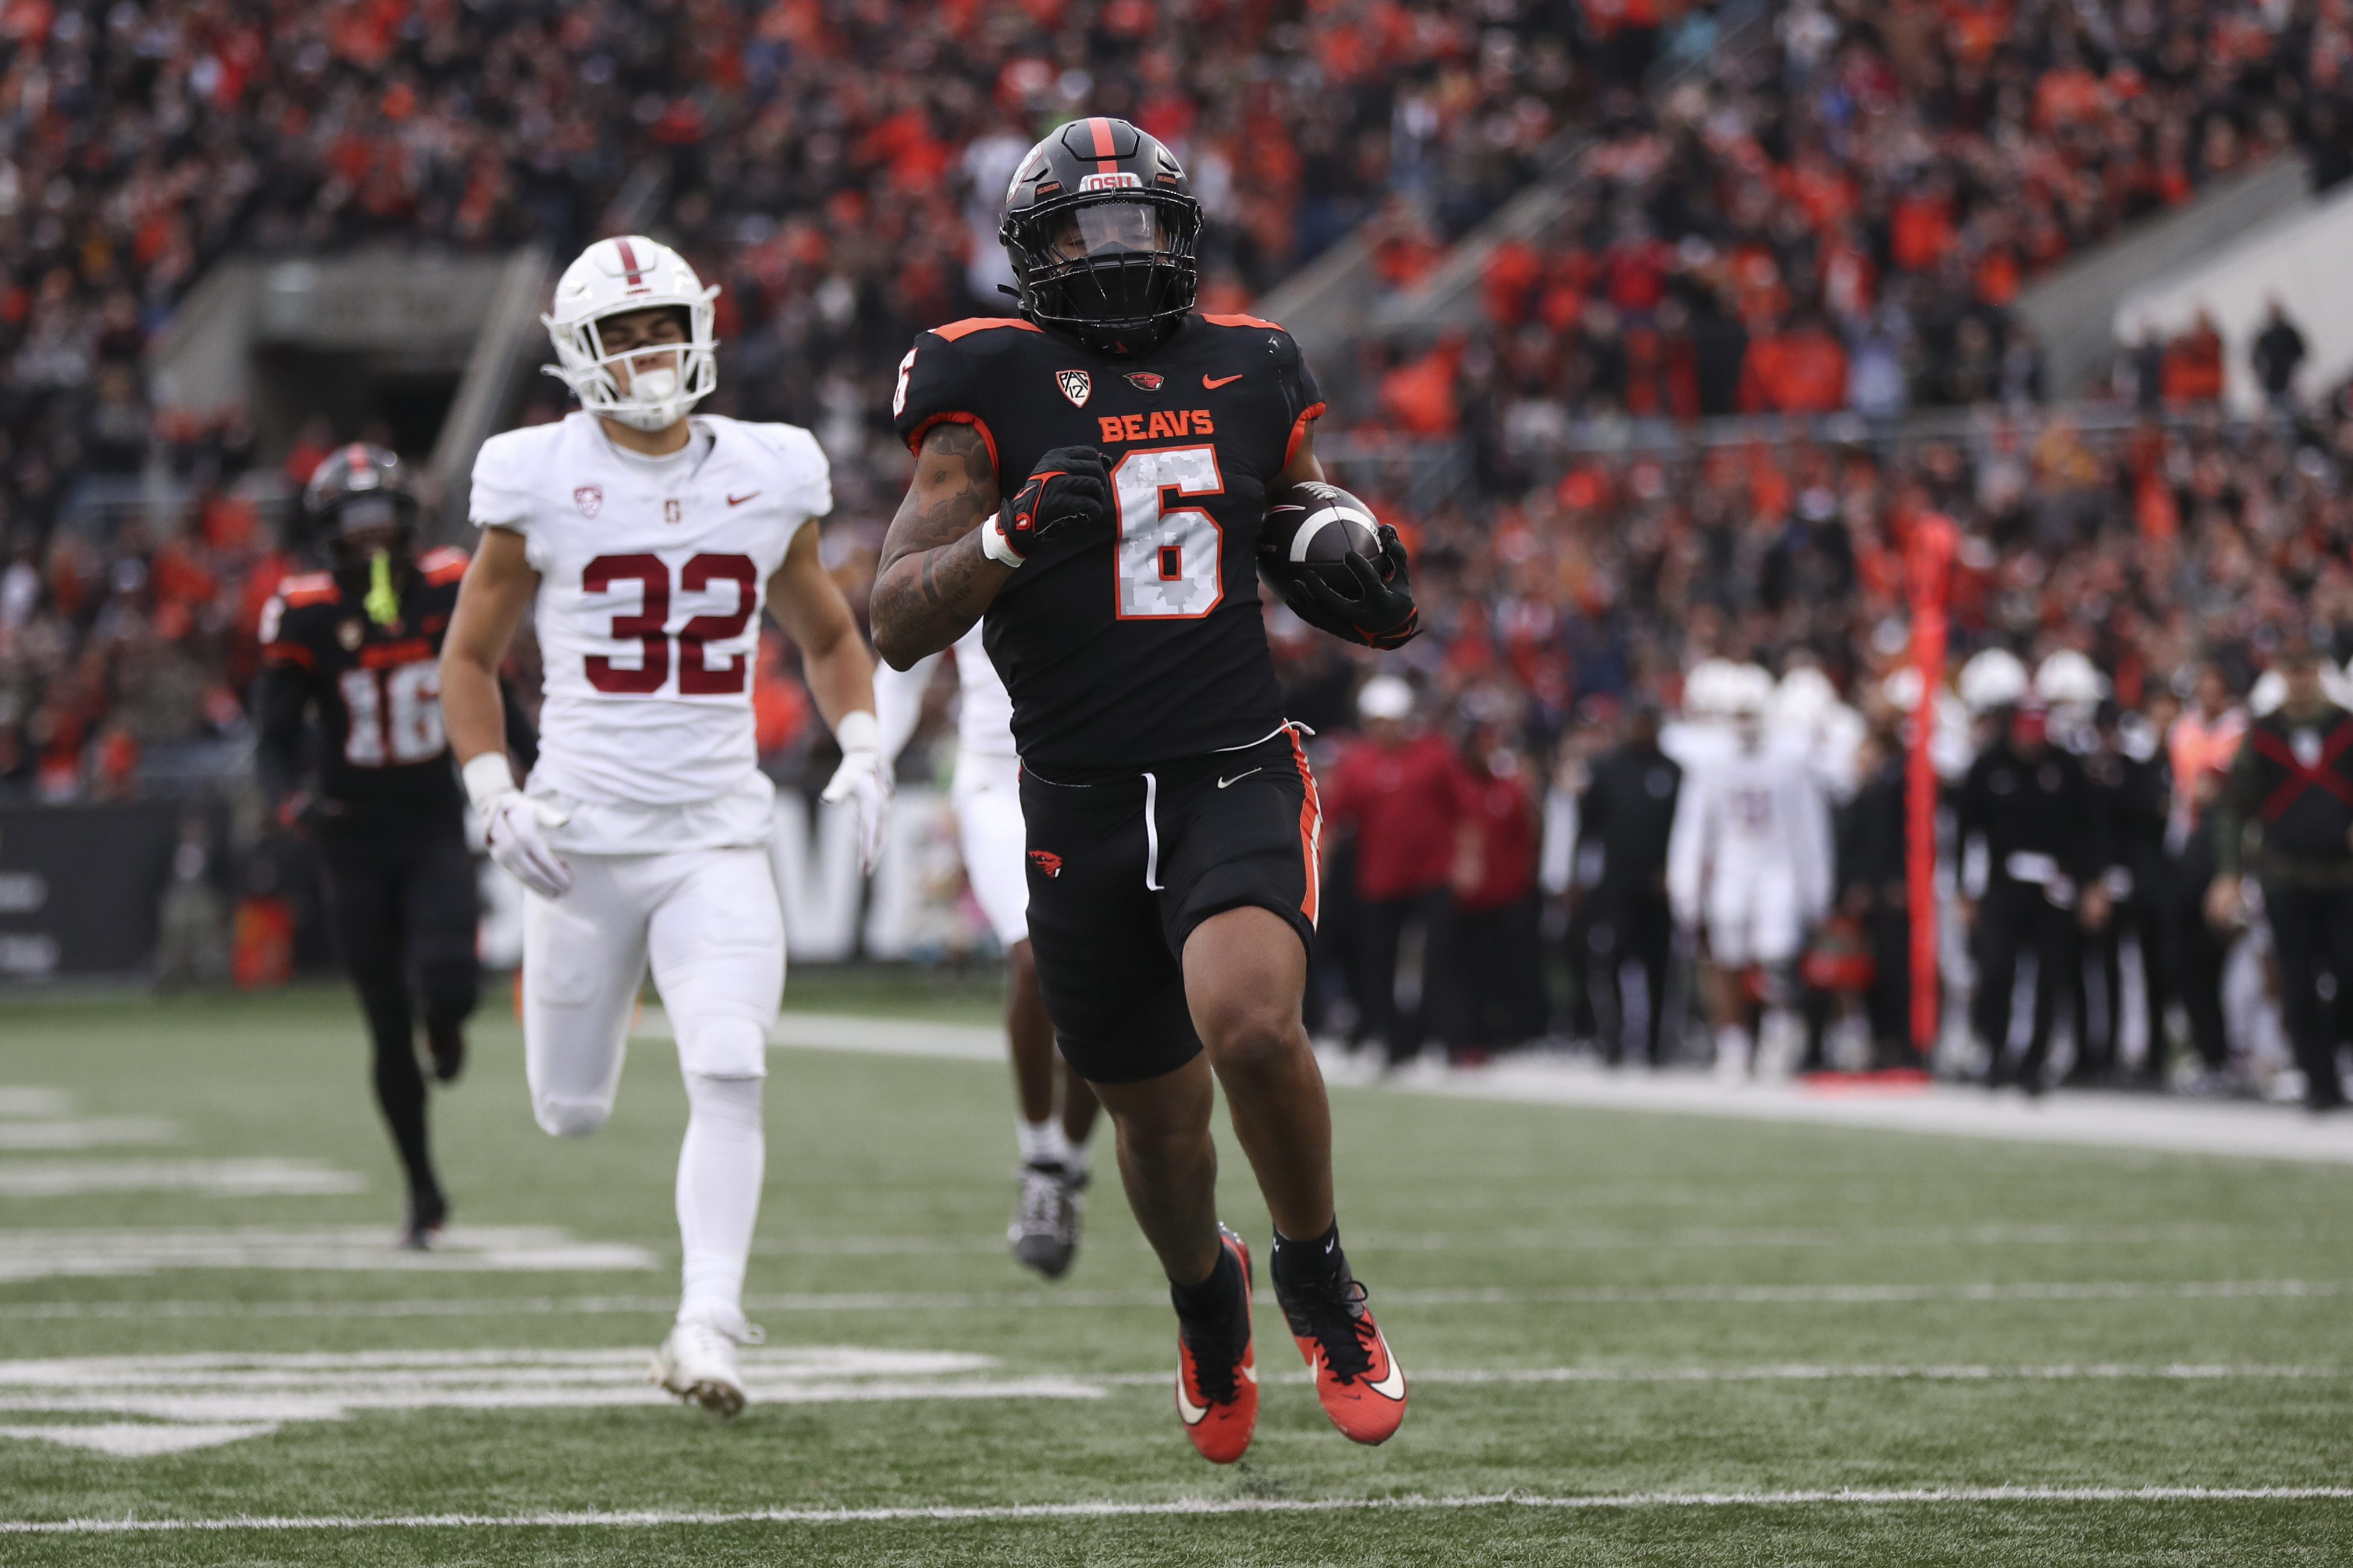 Oregon State routs Stanford 62-17 - OPB